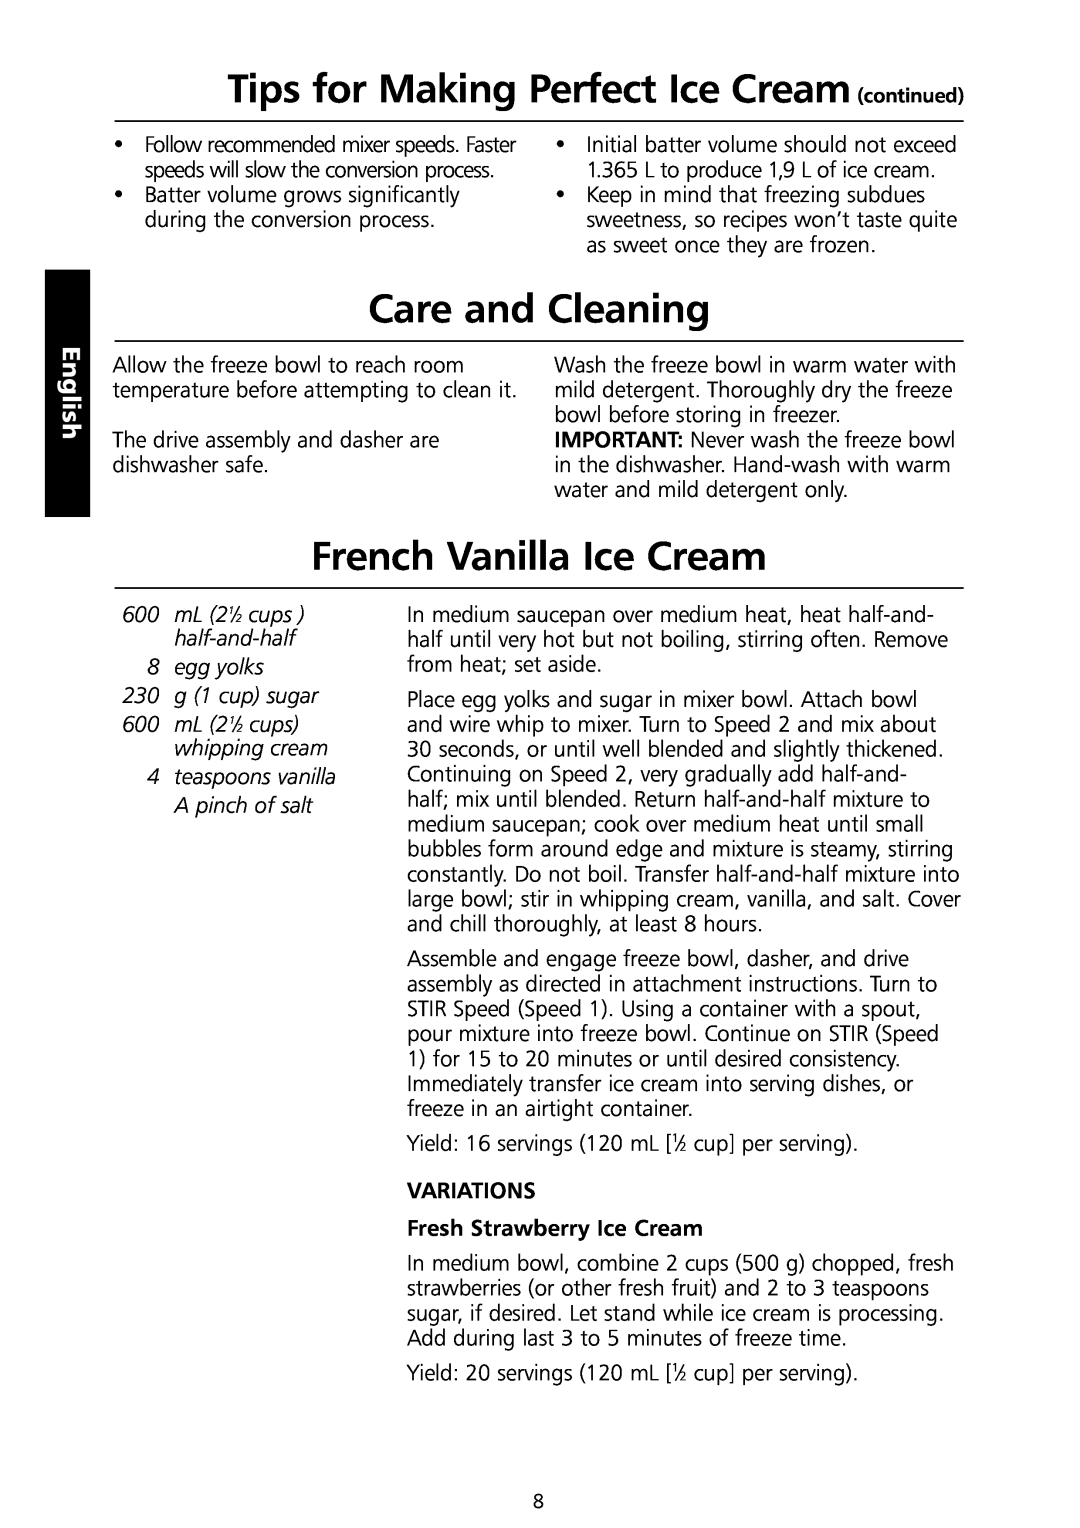 KitchenAid 5KICA0WH continuedTips for Making Perfect Ice Cream continued, Care and Cleaning, French Vanilla Ice Cream 